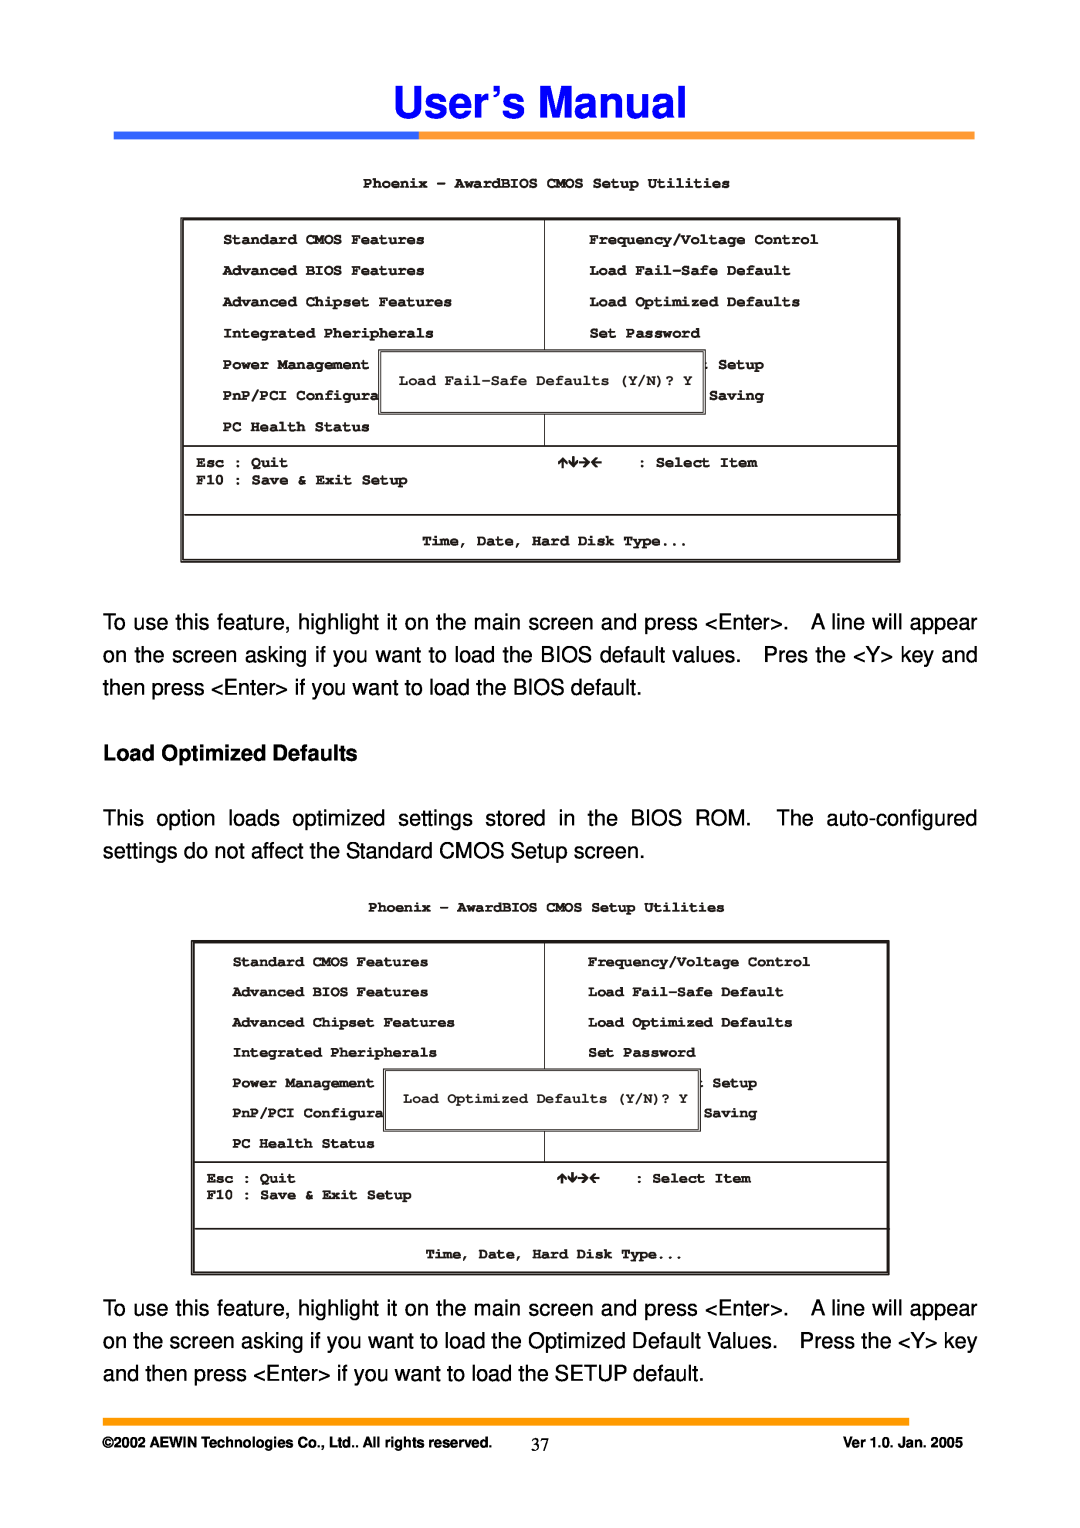 Intel AW-A795 user manual Load Optimized Defaults, User’s Manual 